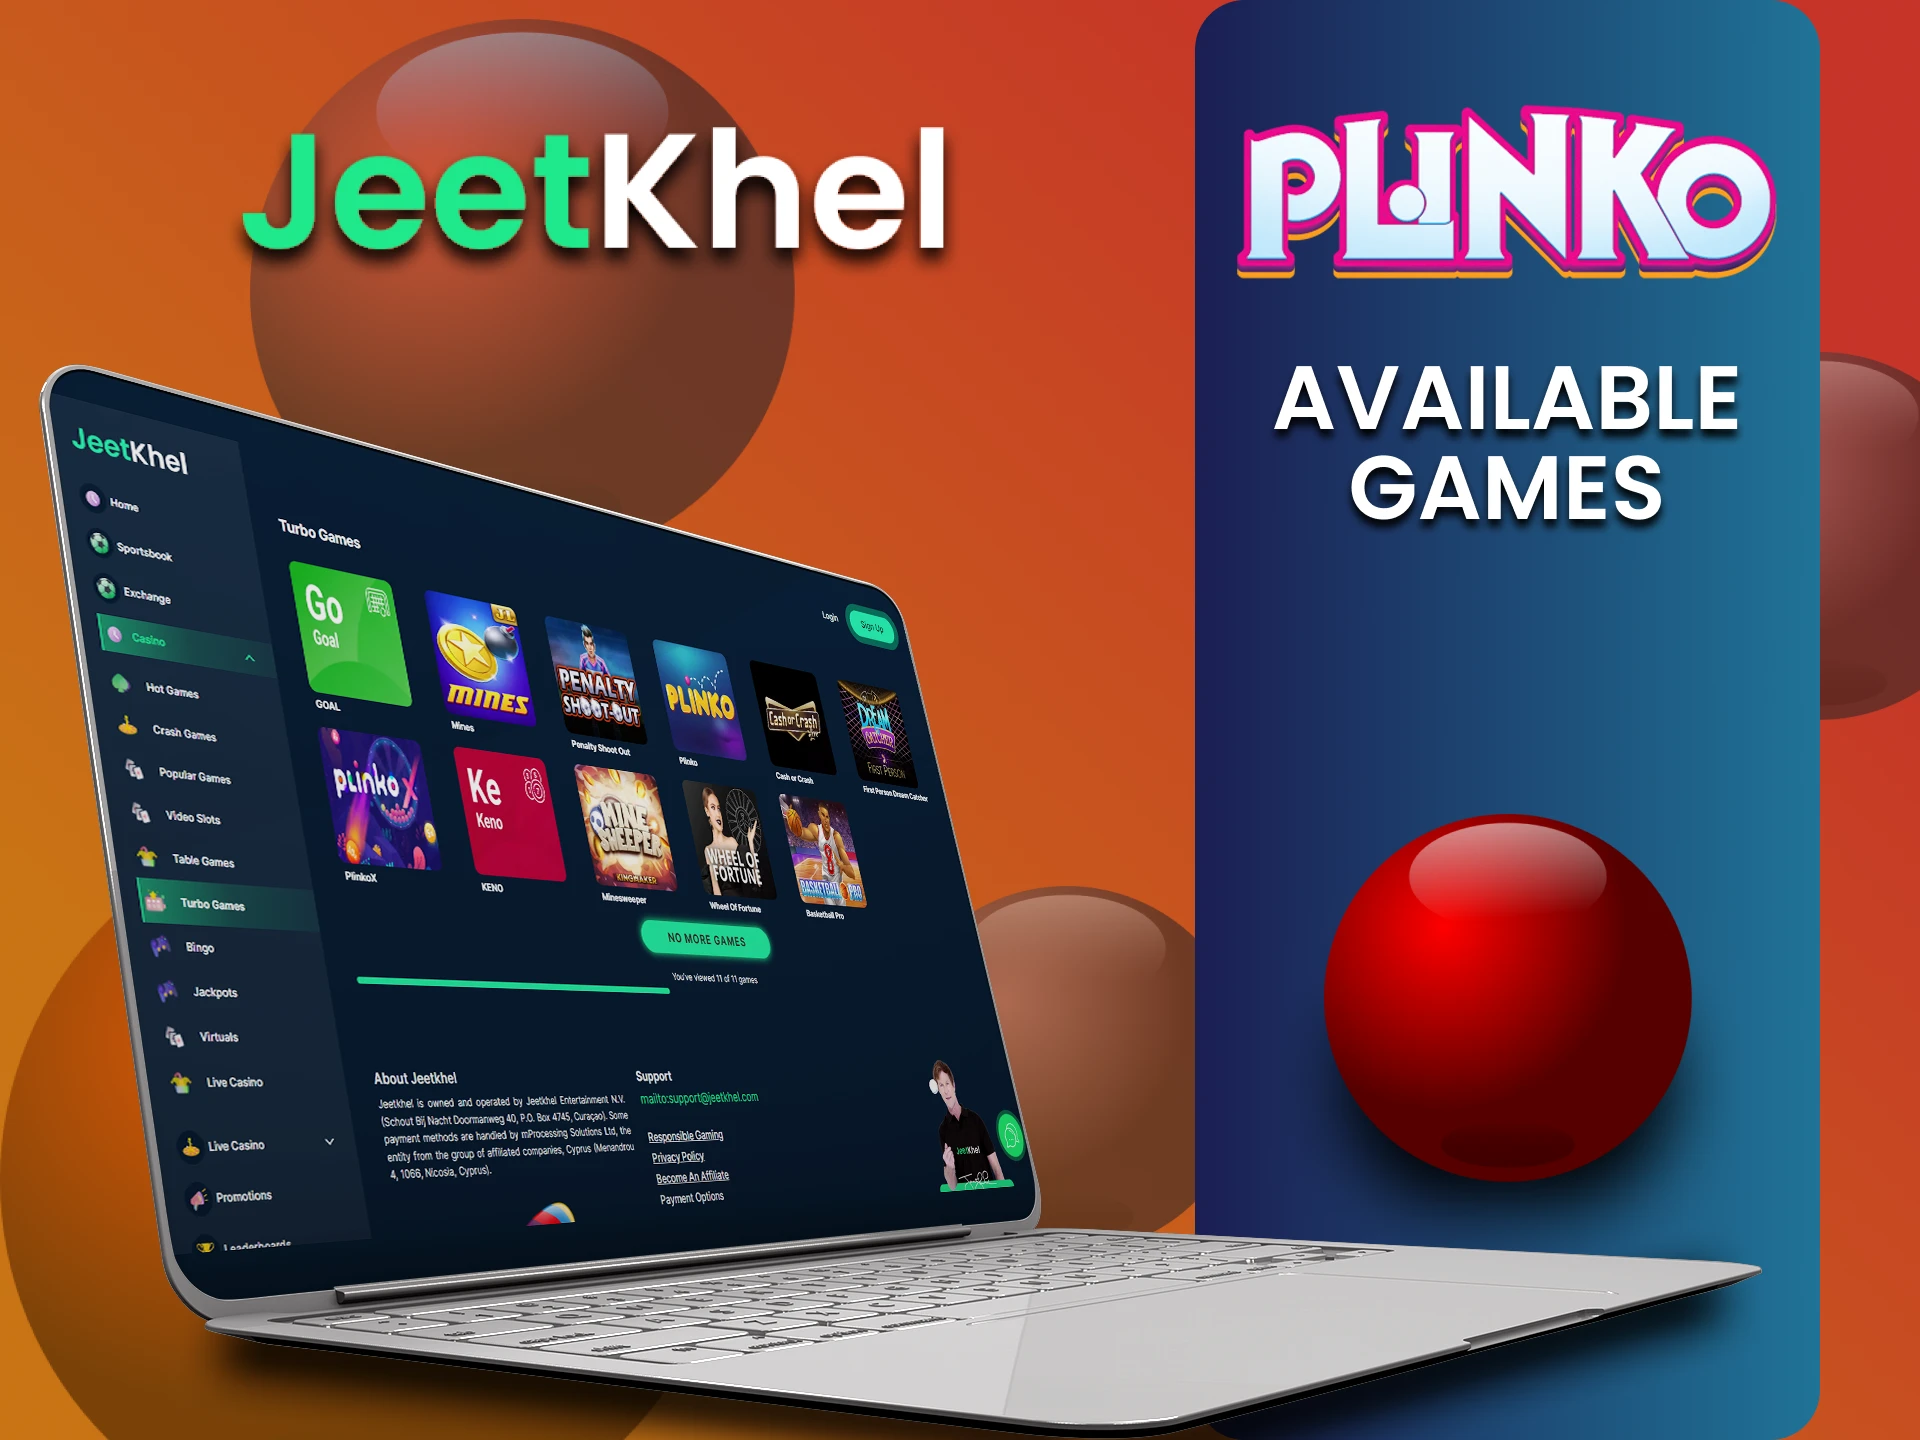 There are several options for playing Plinko on JeetKhel.